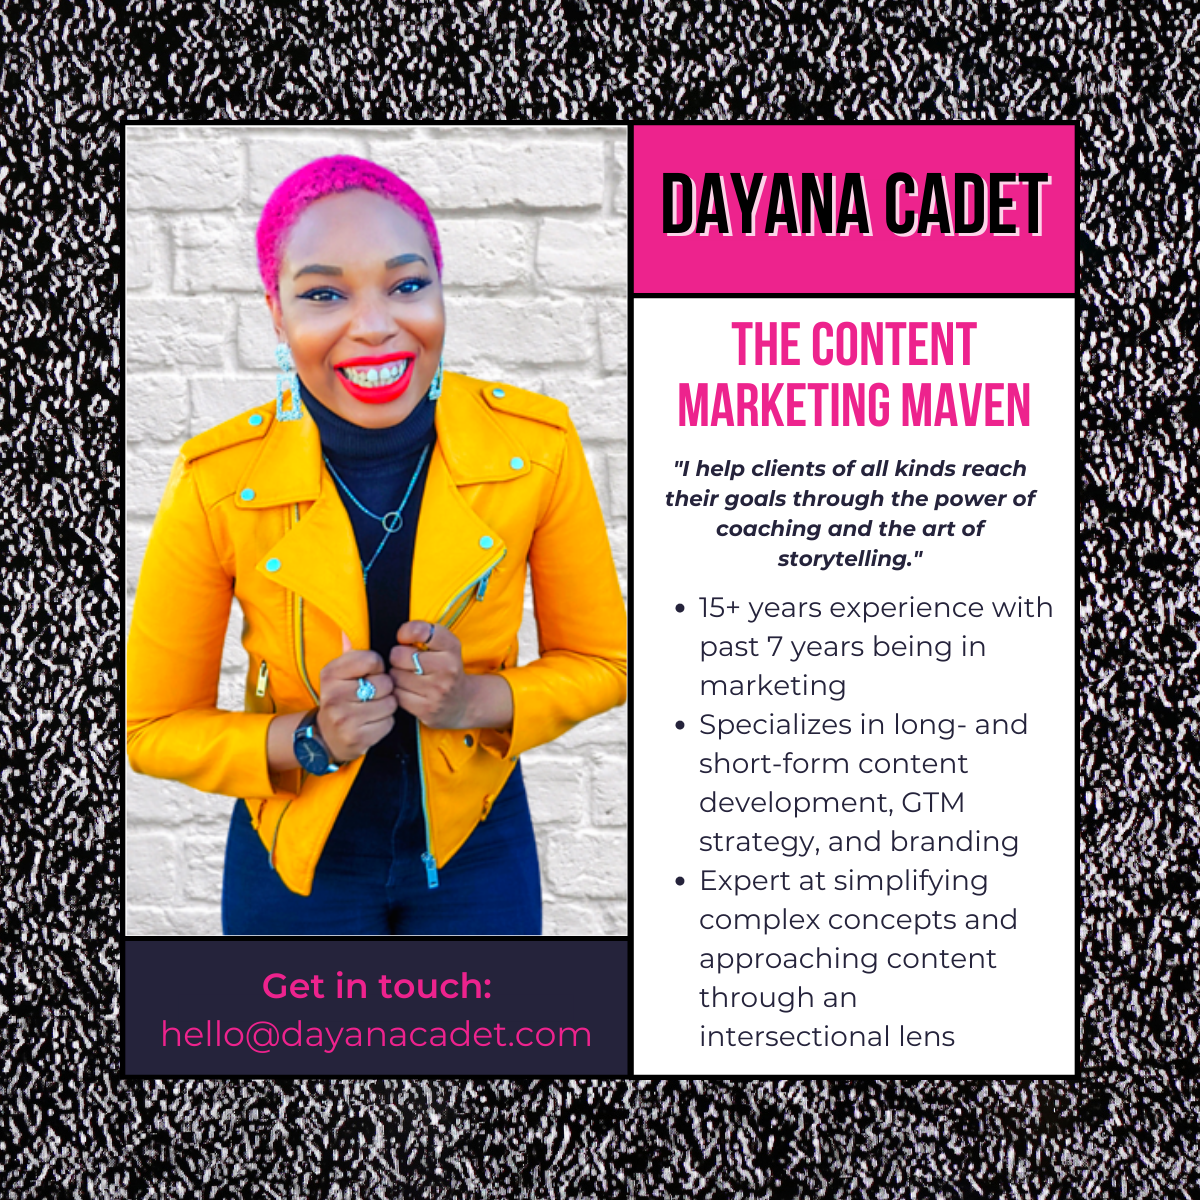 Dayana Cadet: The Content Marketing Maven. BIOGRAPHY: "I help clients of all kinds reach their goals through the power of coaching and the art of storytelling." 15+ years experience with past 7 years being in marketing. Specializes in long- and short-form content development, GTM strategy, and branding. Expert at simplifying complex concepts and approaching content through an intersectional lens.